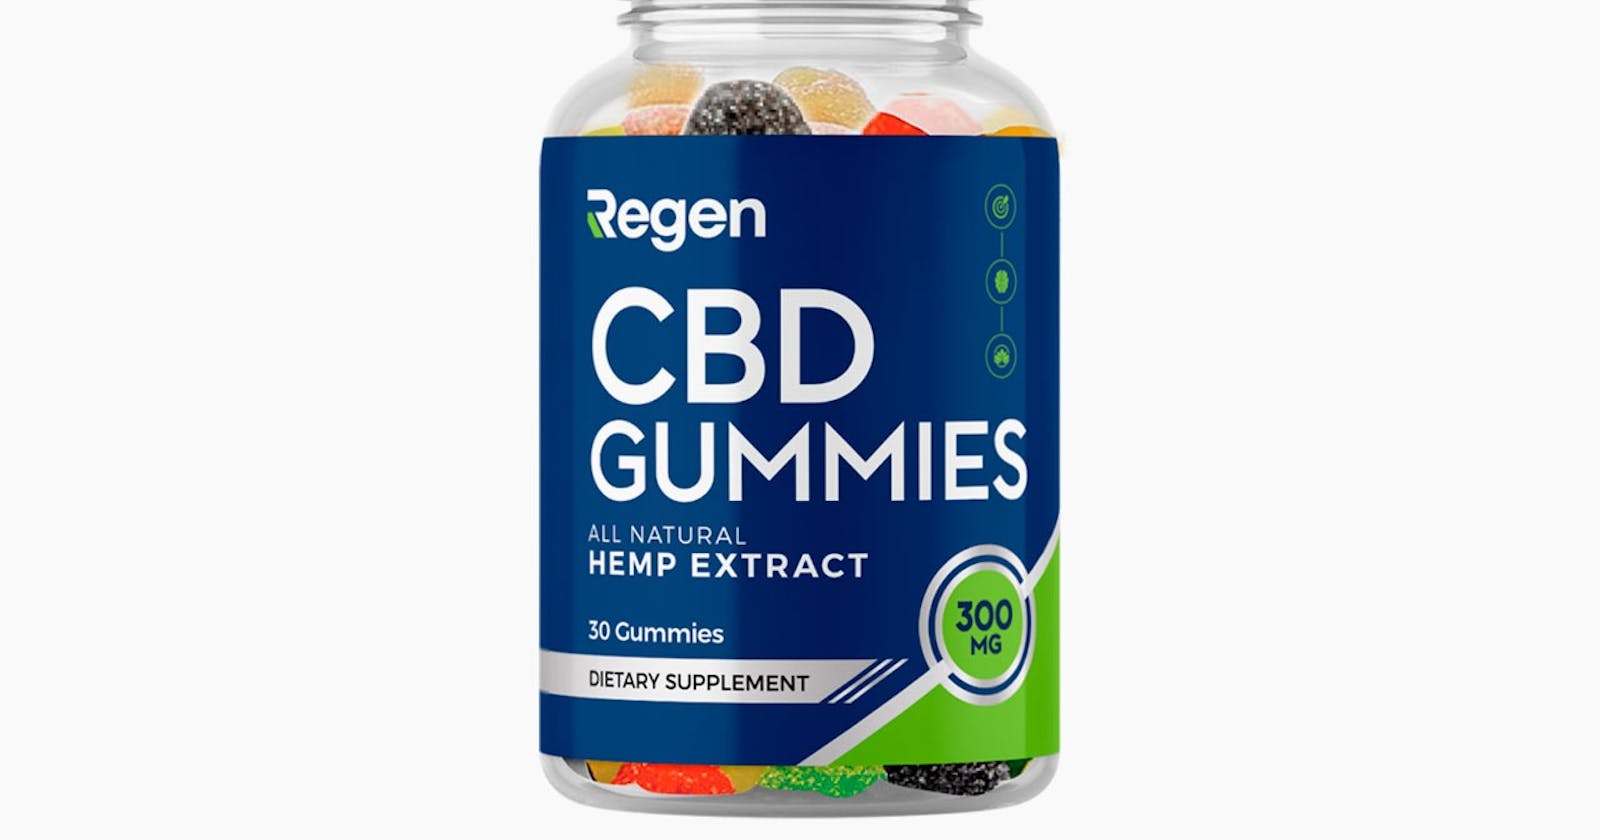 Regen CBD Gummies For ED Reviews [Updated] Safe Results for Customers or Scam?